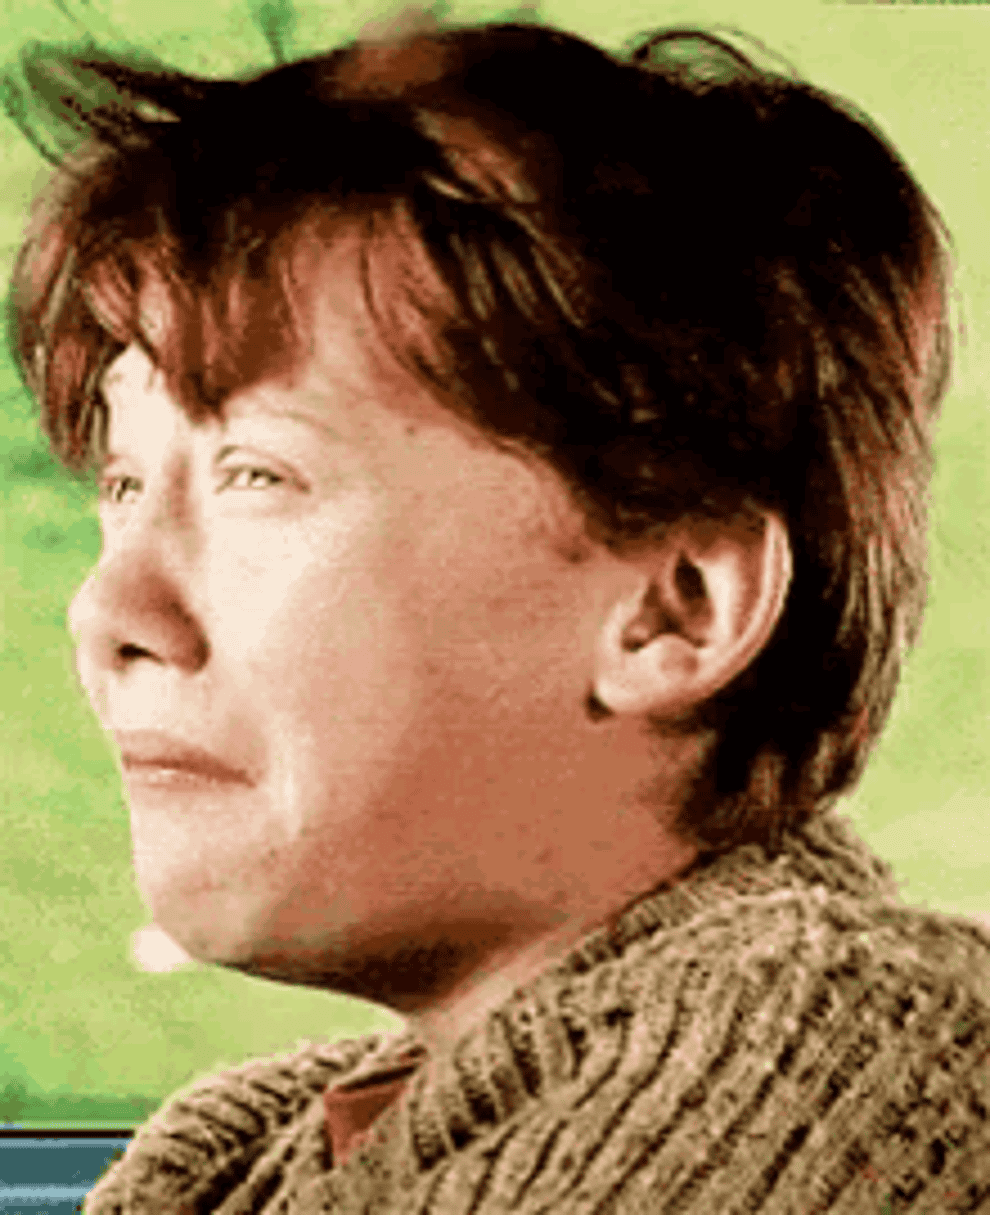 A close up of Ron Weasley as he turns his head to the side with a scared face